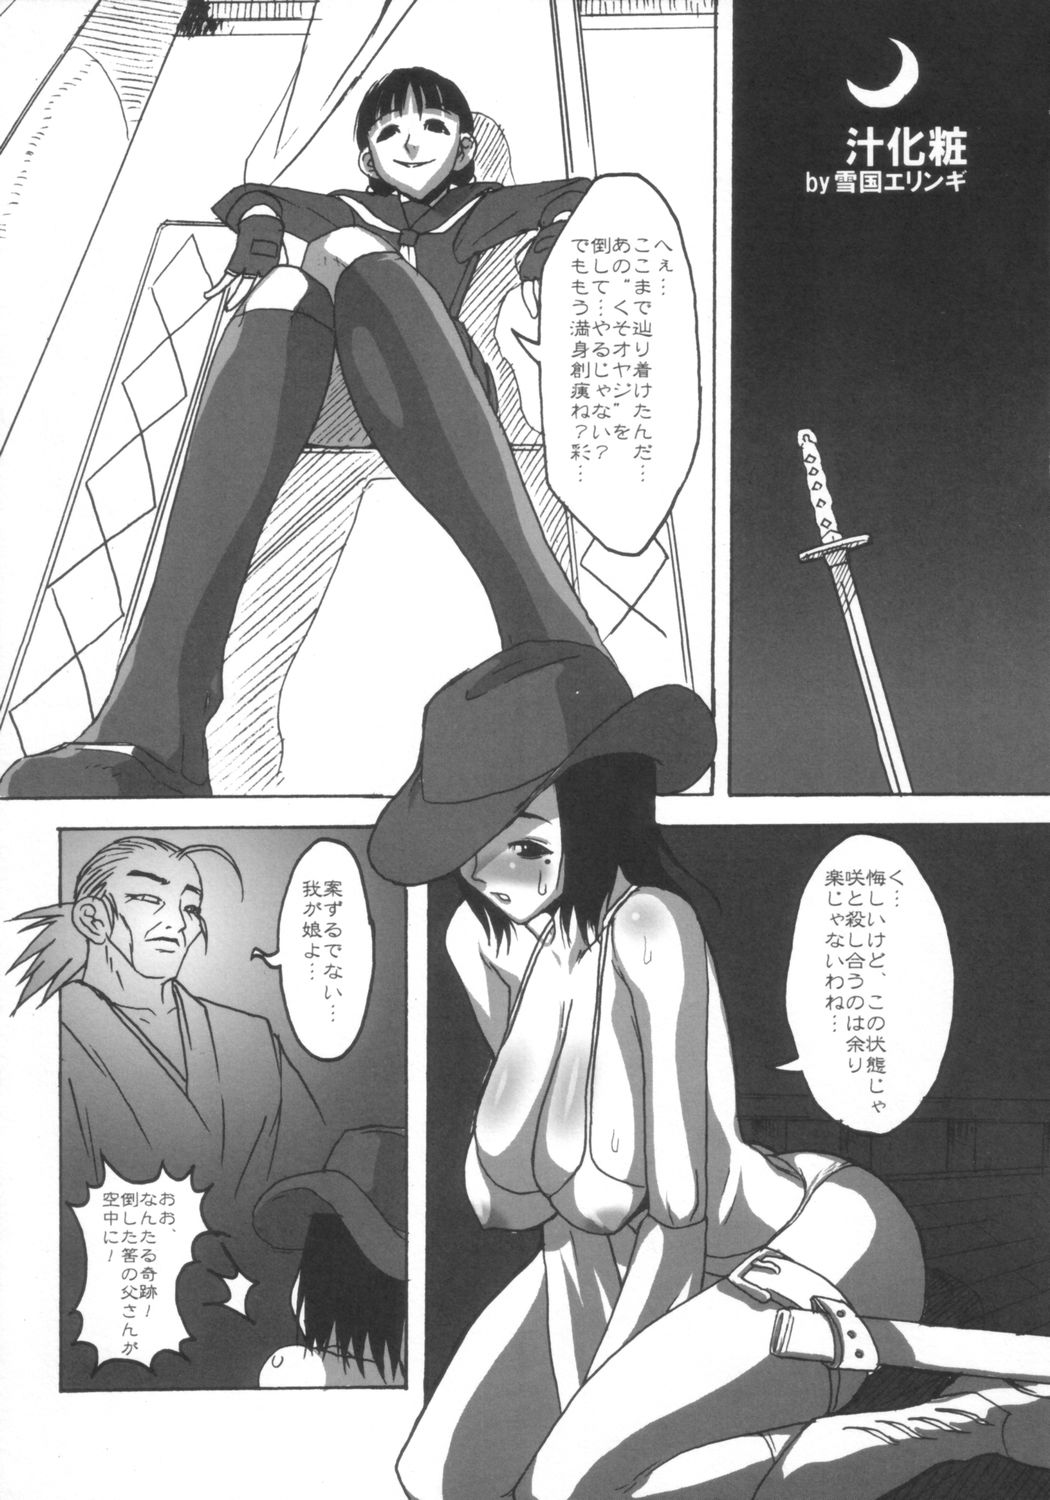 [VARIABLE] The One-Paizuri 1 page 4 full